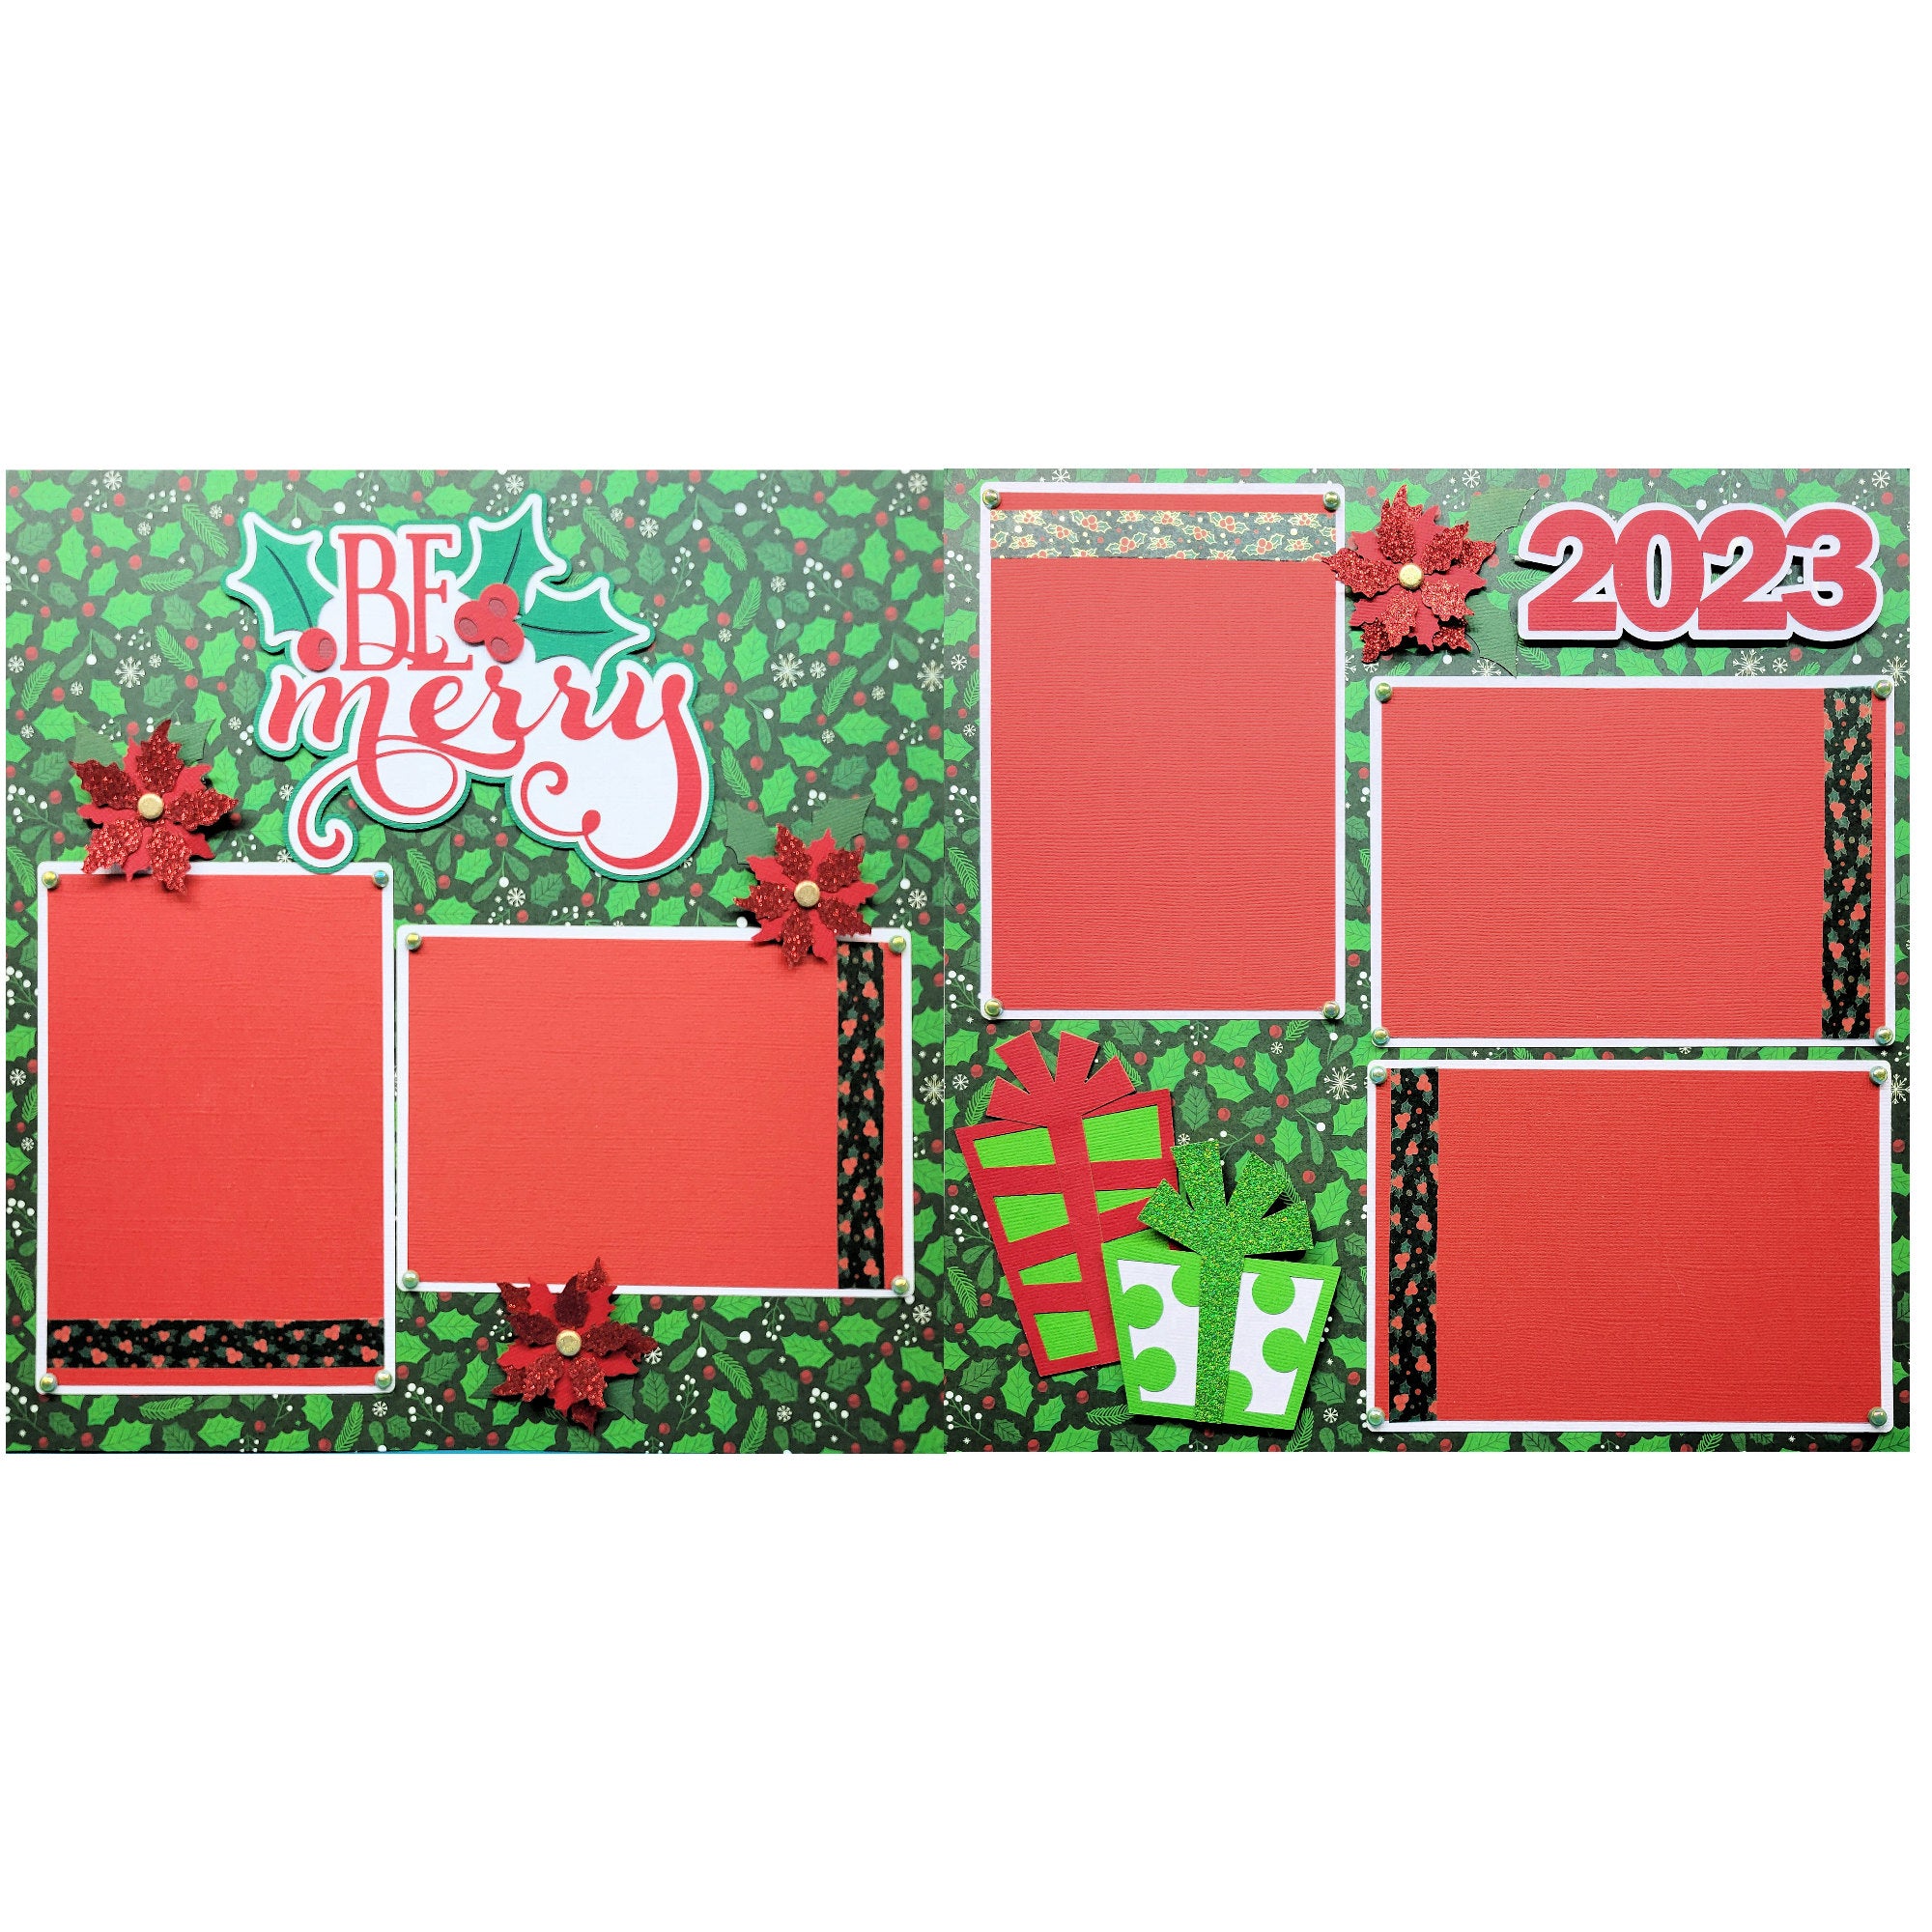 Be Merry 2 - 12 x 12 Pages, Fully-Assembled & Hand-Crafted 3D Scrapbook Premade by SSC Designs